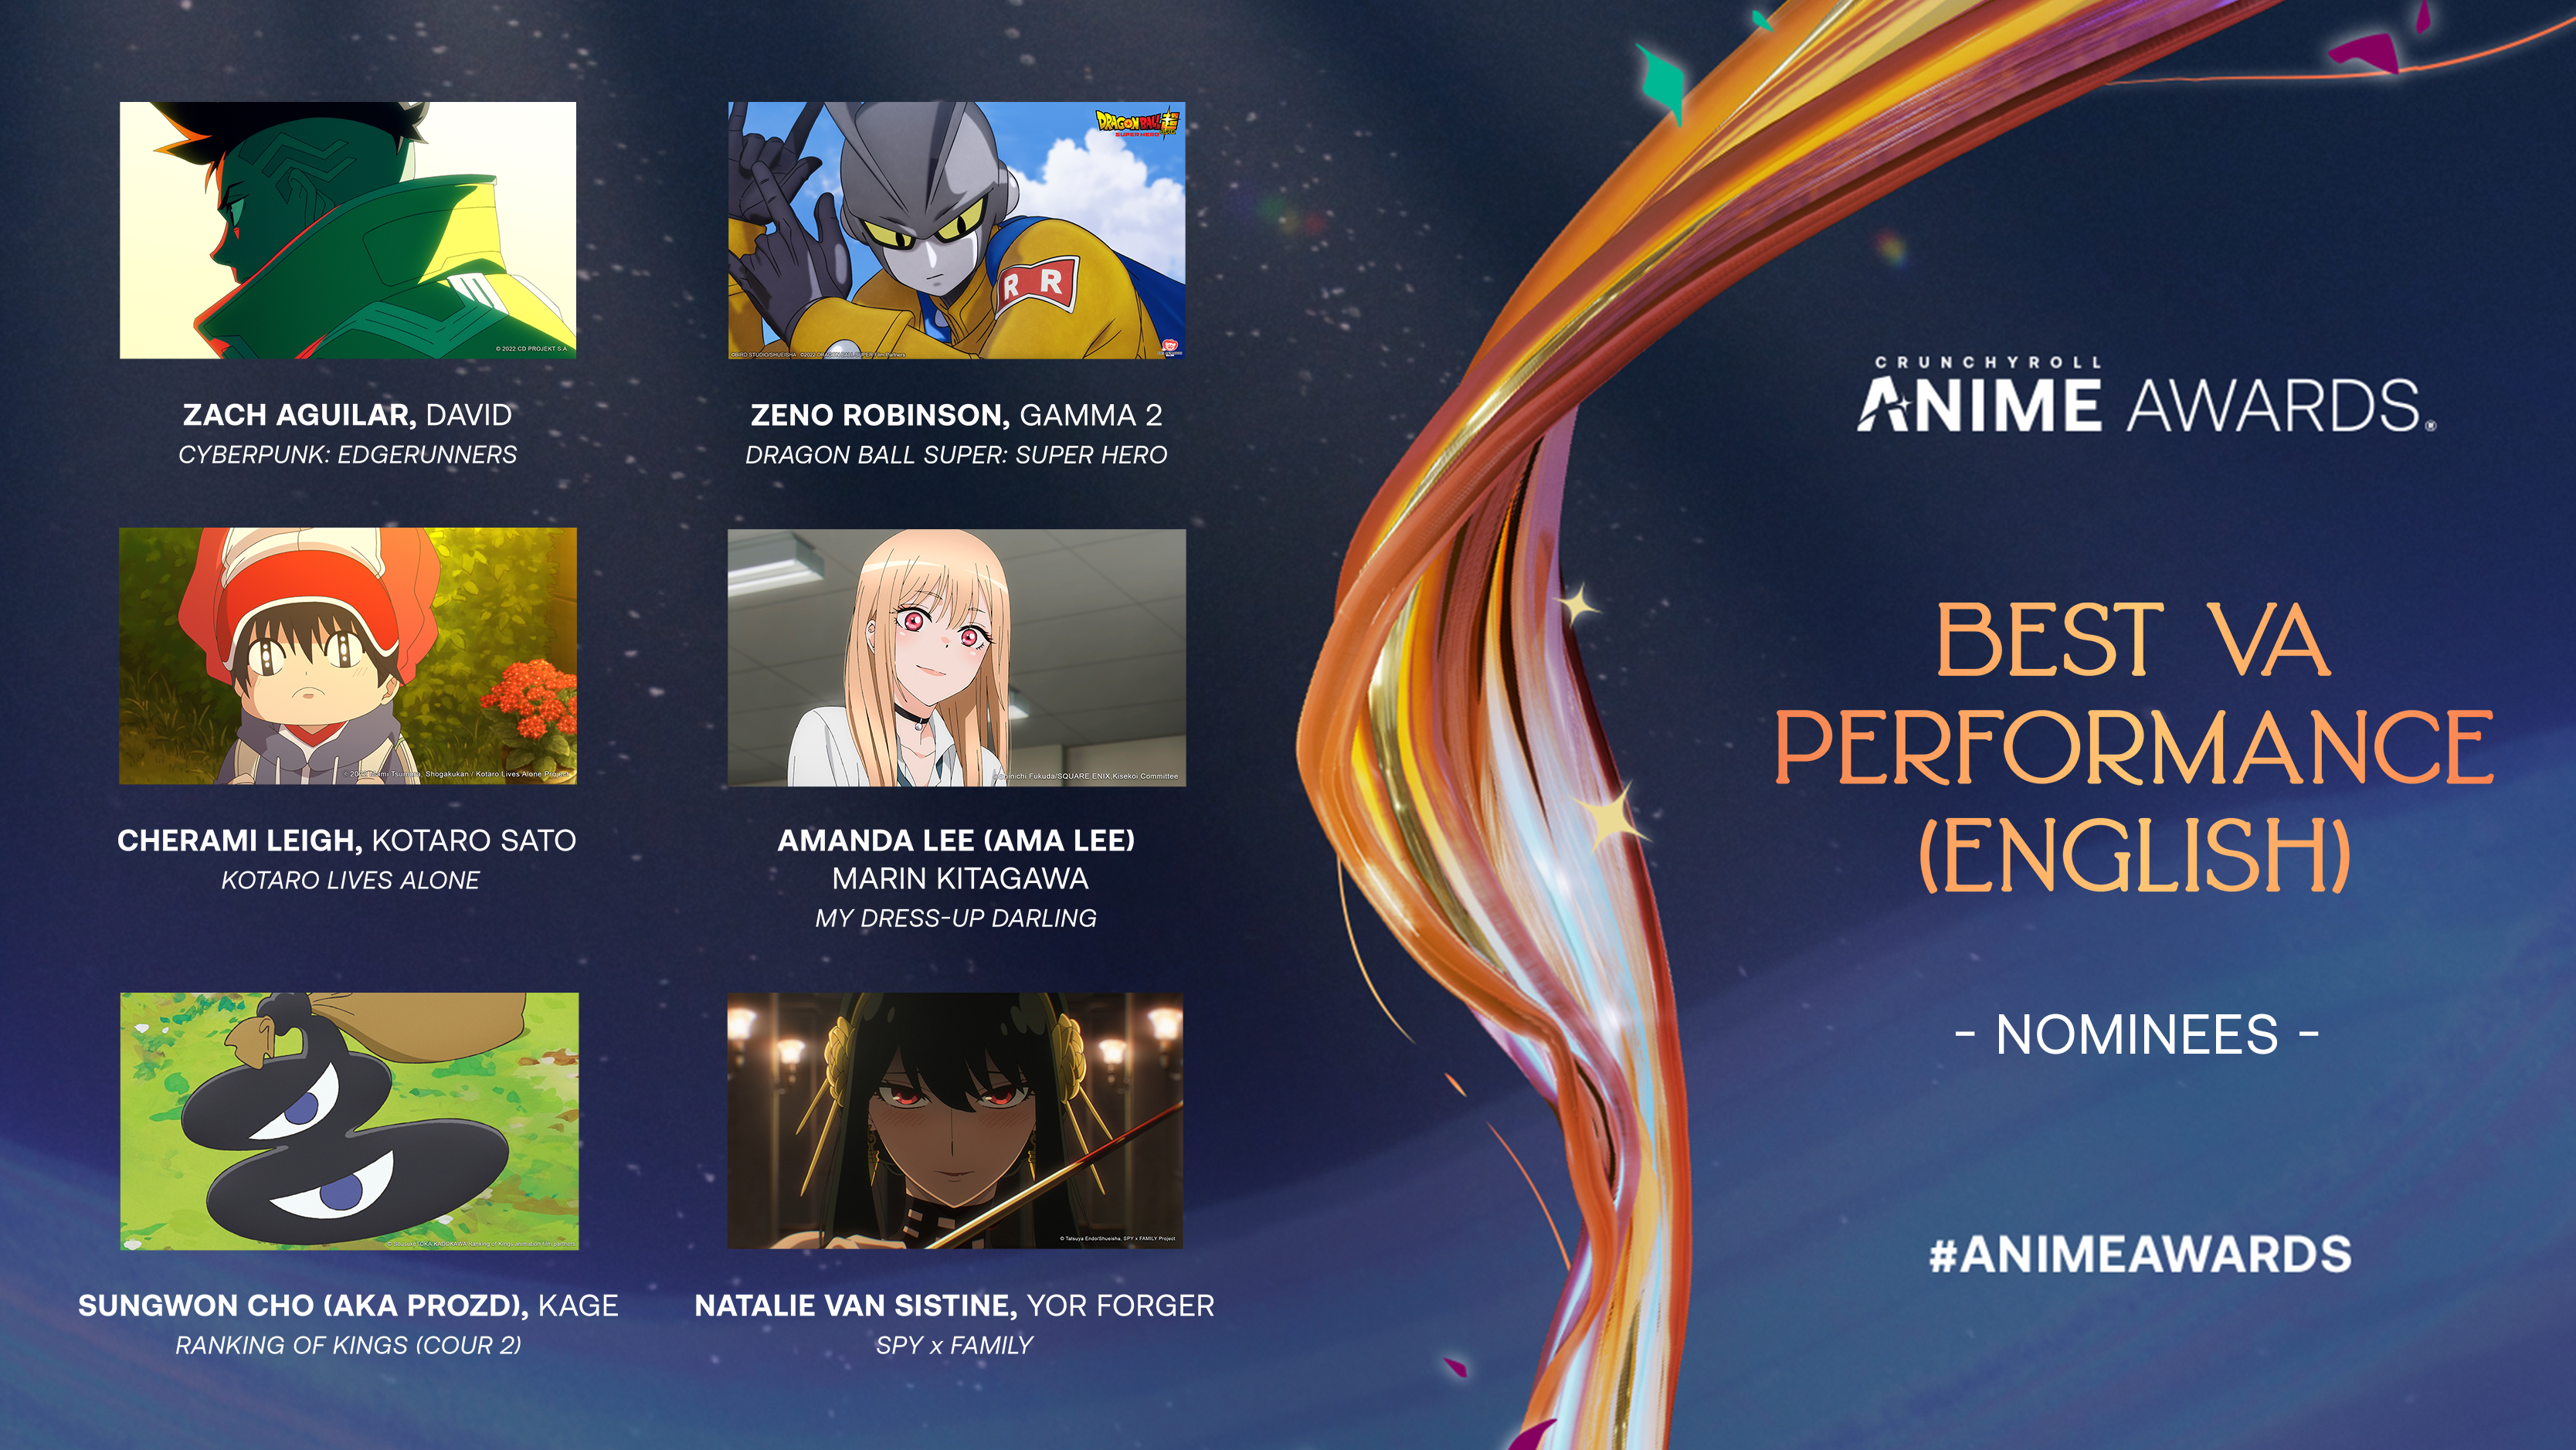 Crunchyroll Anime Awards 2023 Nominees Announced  AFA: Animation For  Adults : Animation News, Reviews, Articles, Podcasts and More